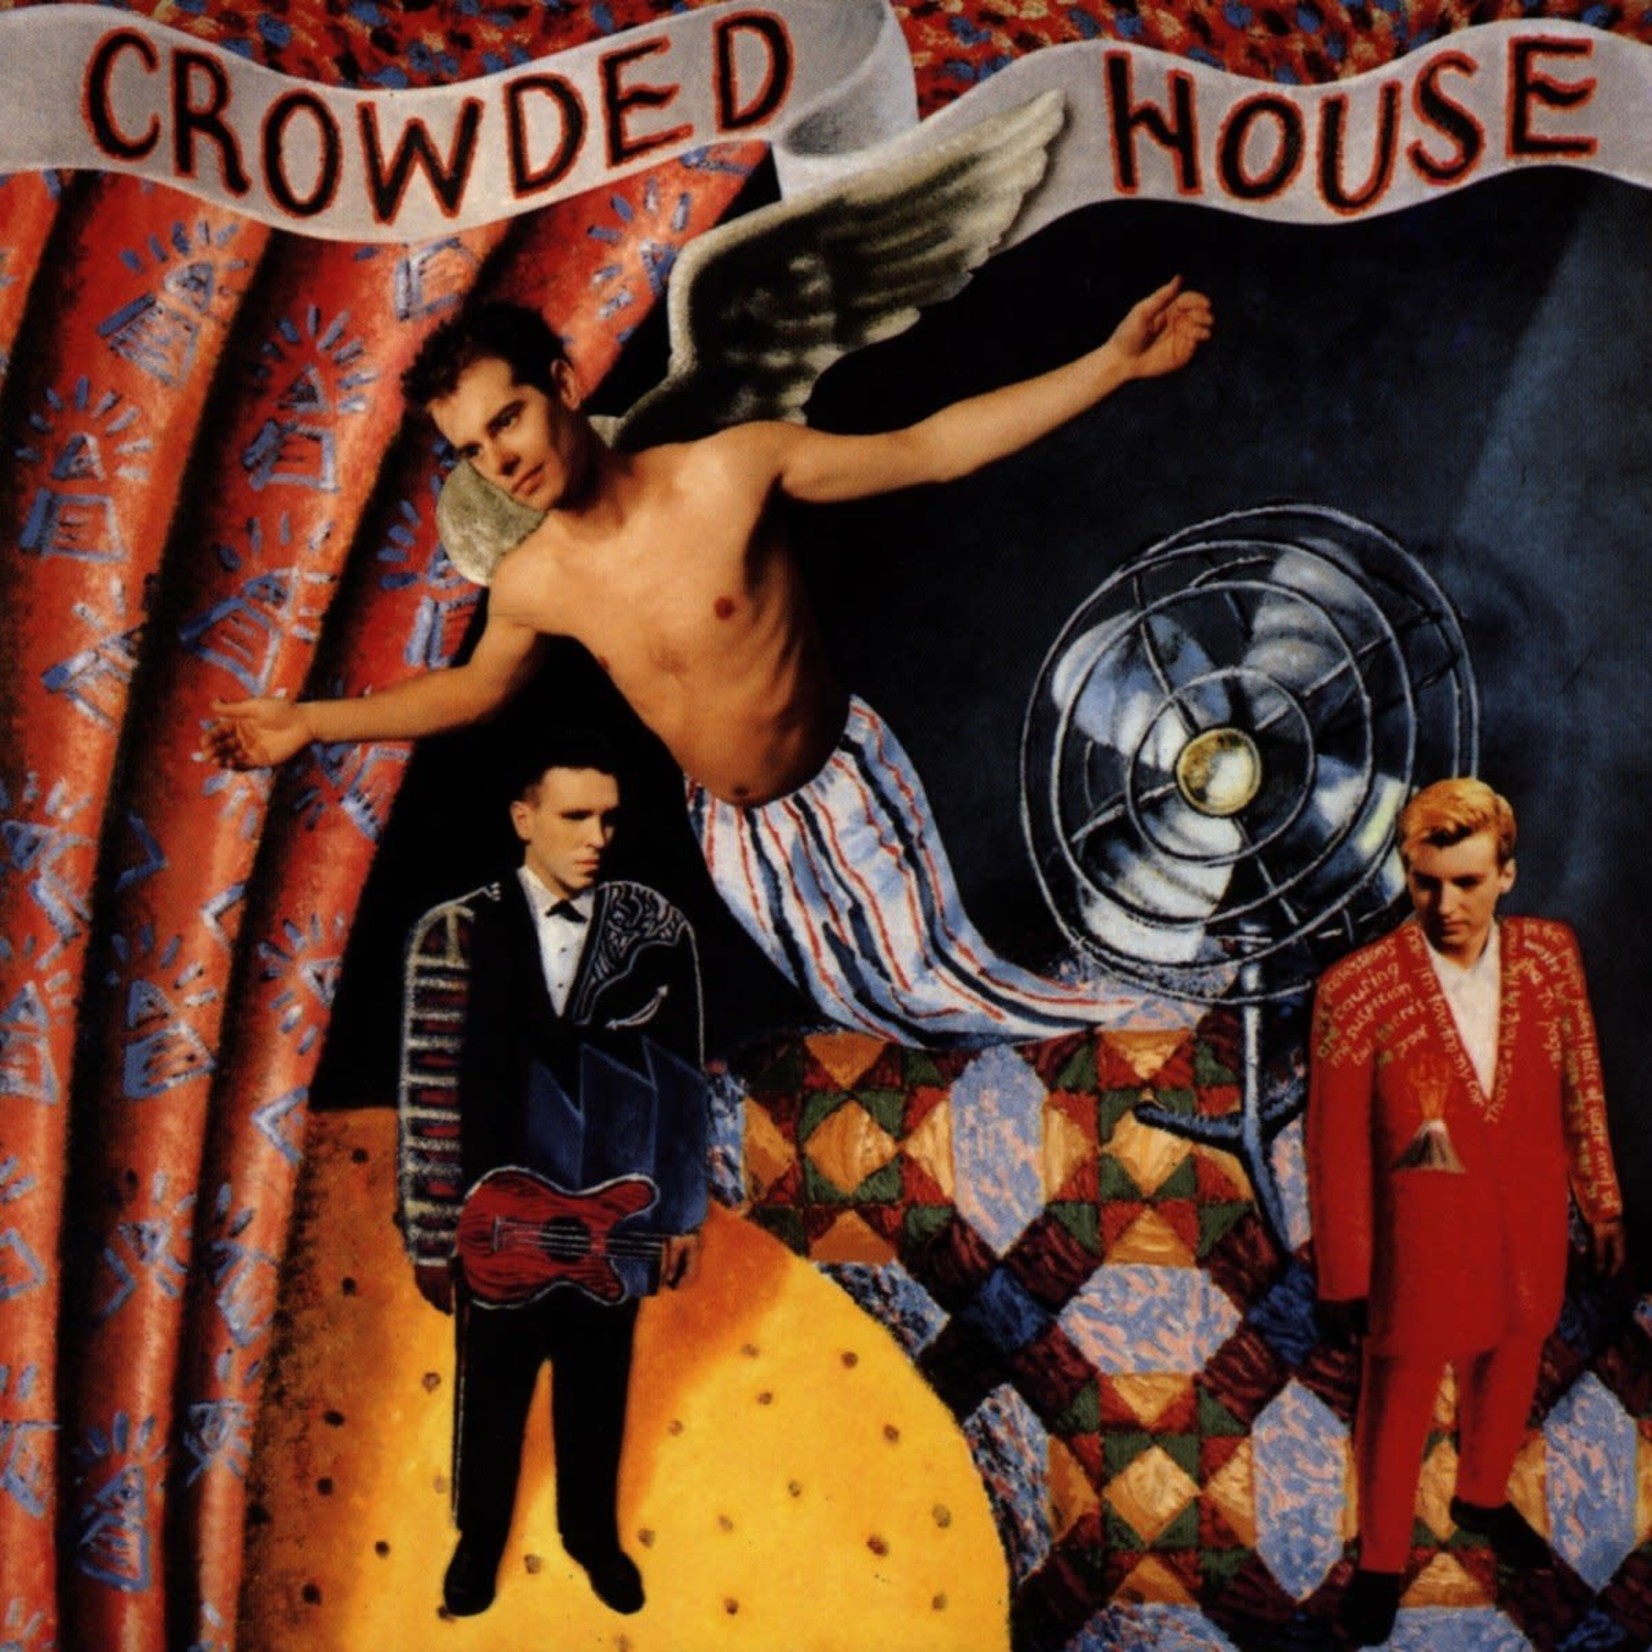 [Vintage] Crowded House - self-titled